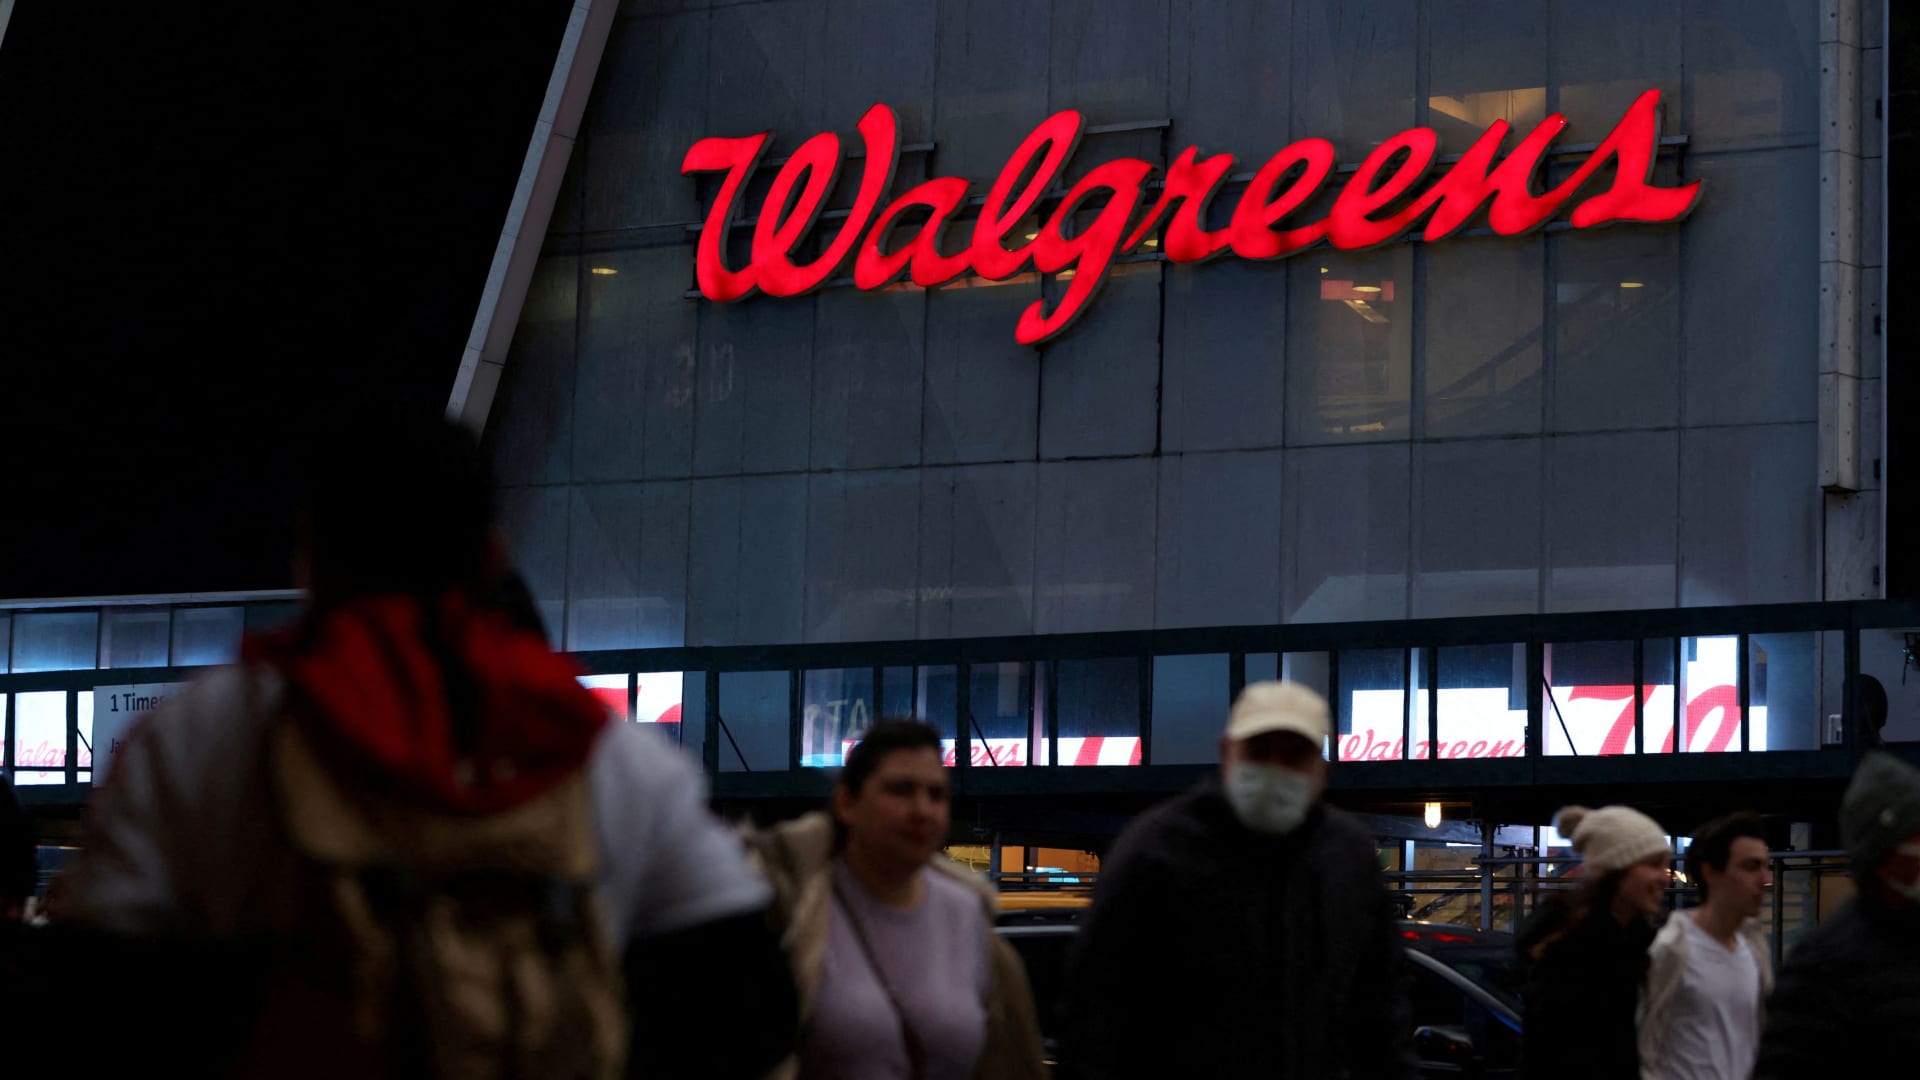 Buy Walgreens as it ramps up its health care strategy, JPMorgan says in upgrade